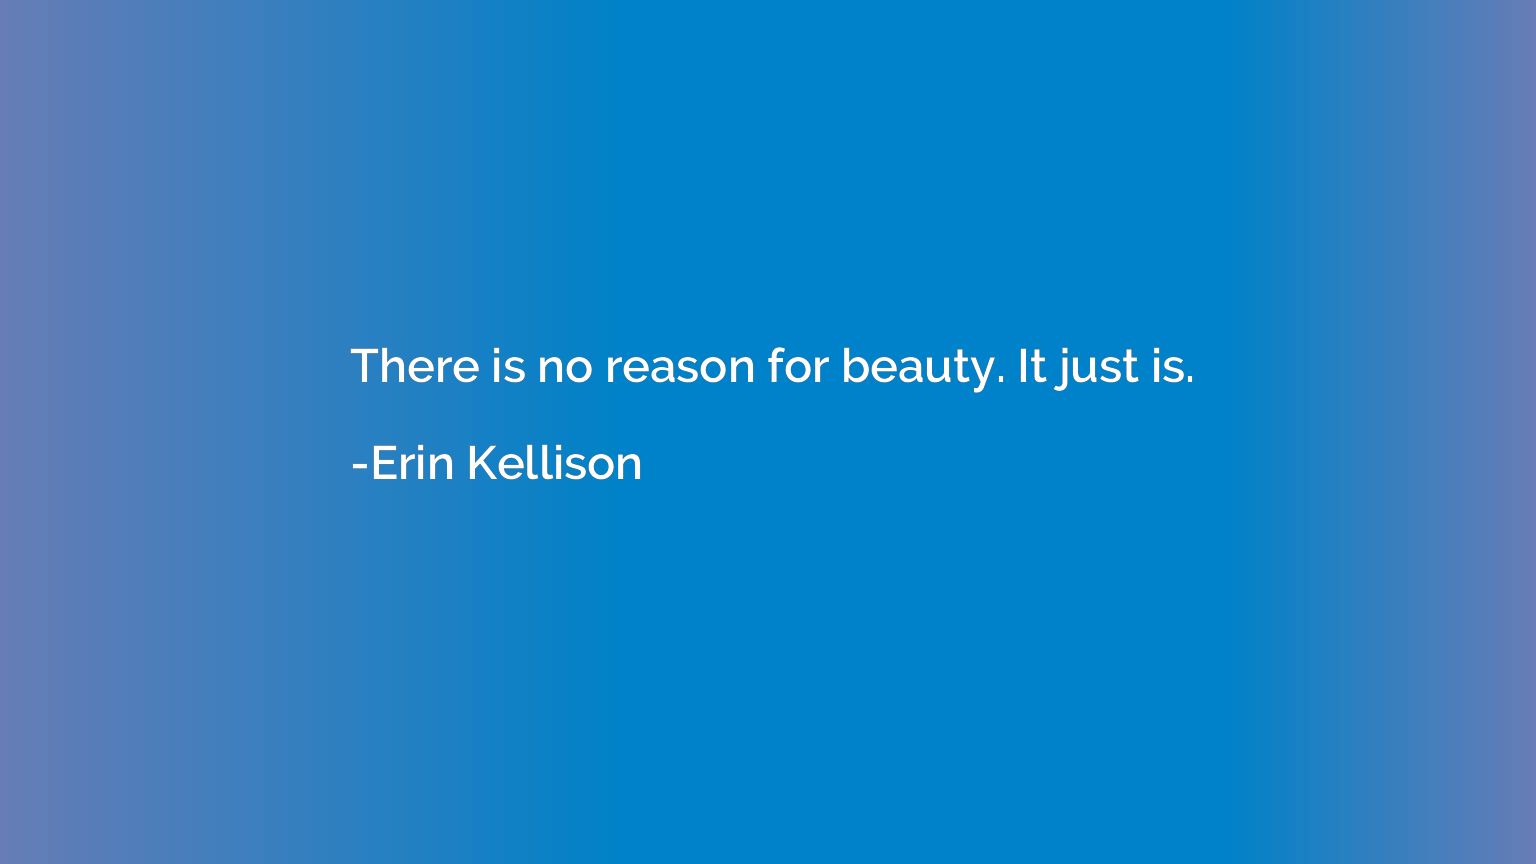 There is no reason for beauty. It just is.